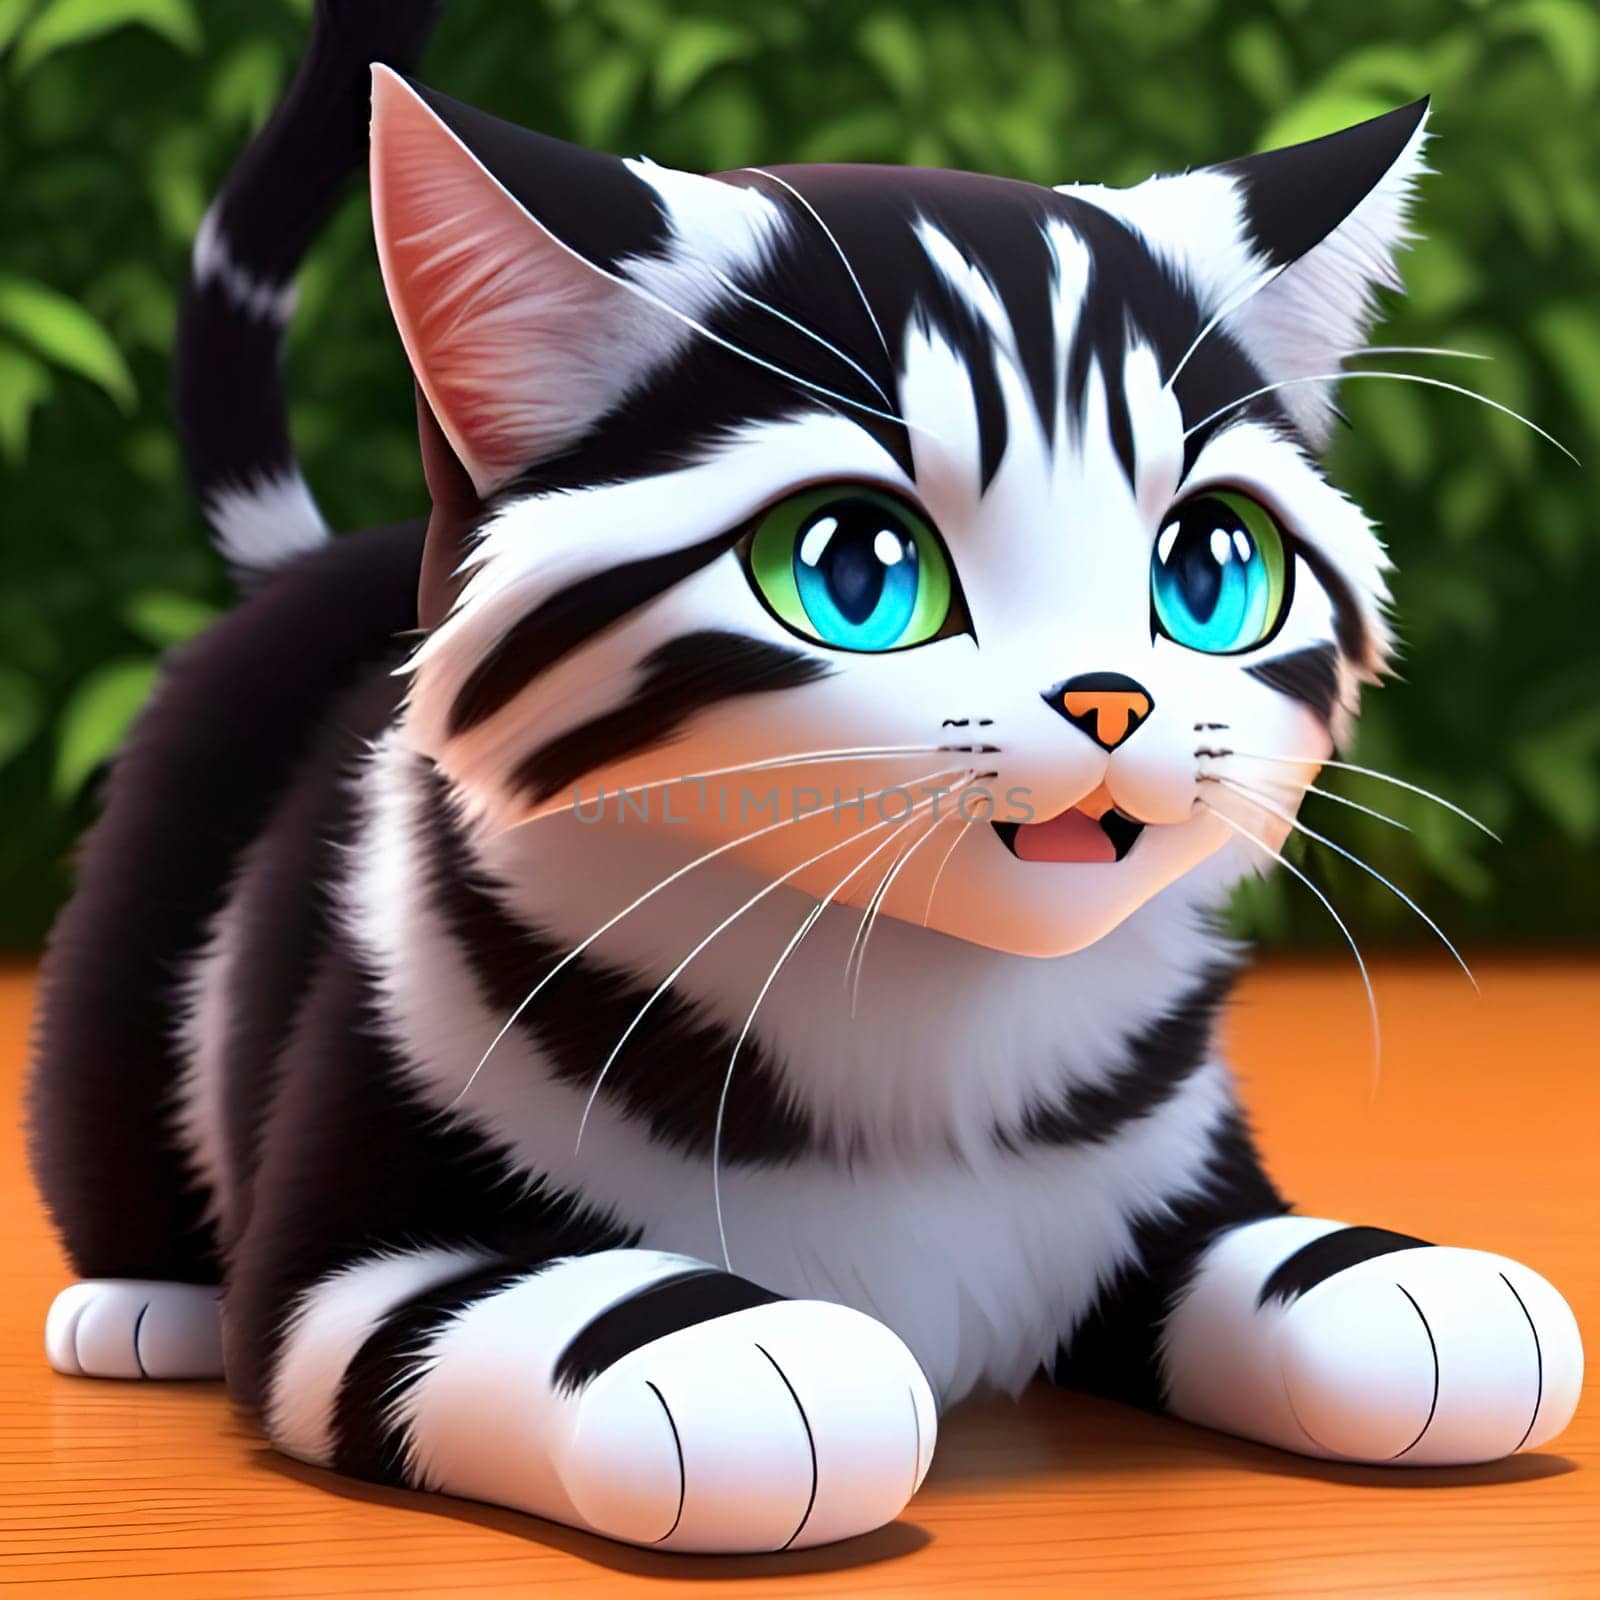 3D cute cats for calendar with cat images. Square image.